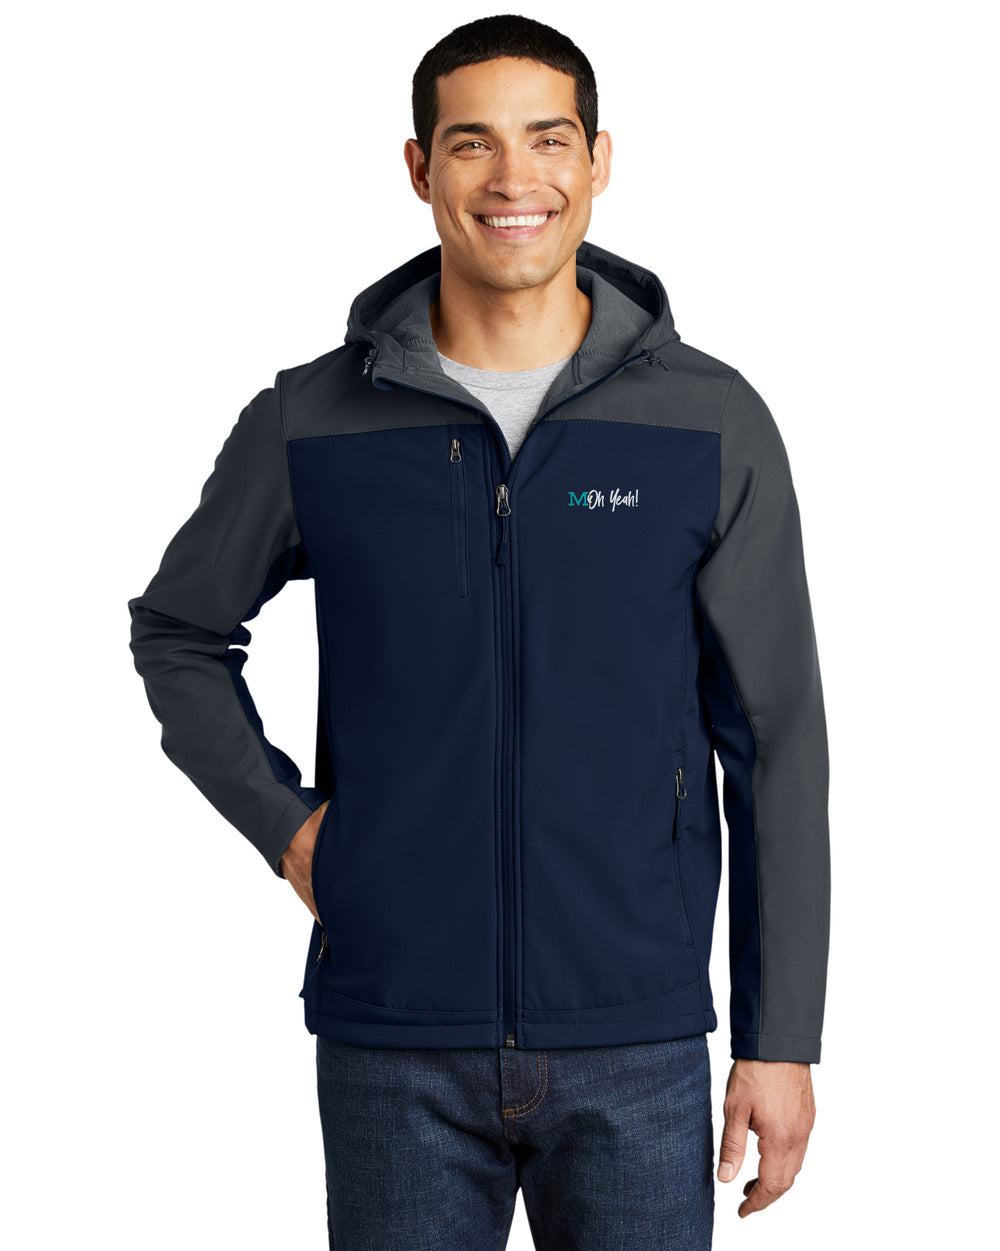 MOh Yeah - Port Authority Hooded Core Soft Shell Jacket - J335